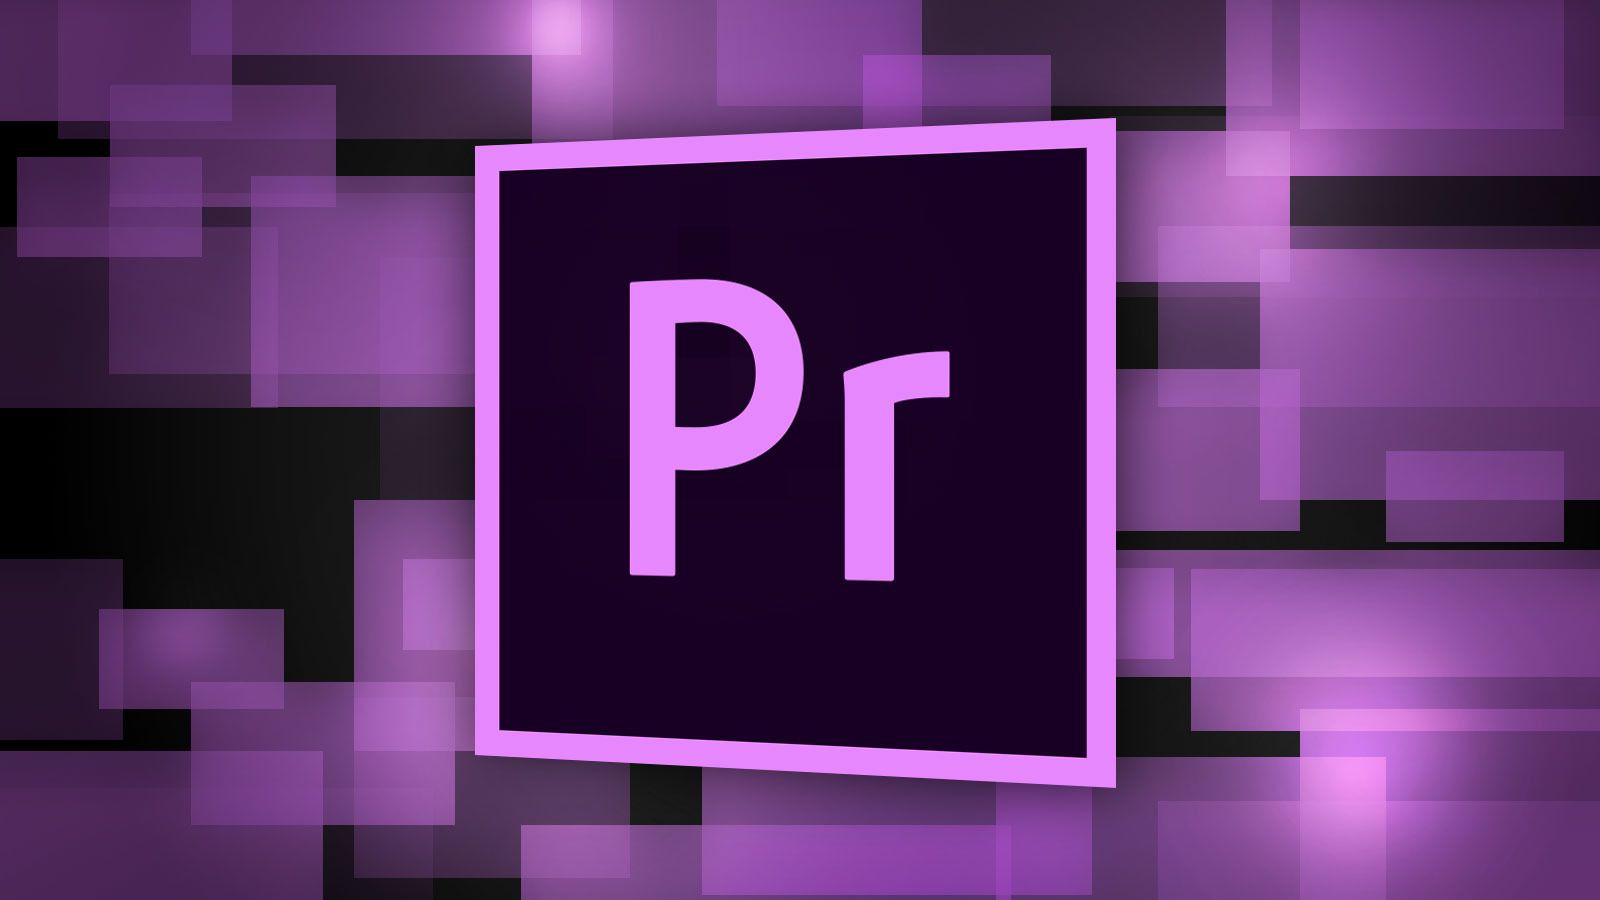 Adobe Premiere Pro from the Adobe suite is a video editing tool of the non linear editing age.